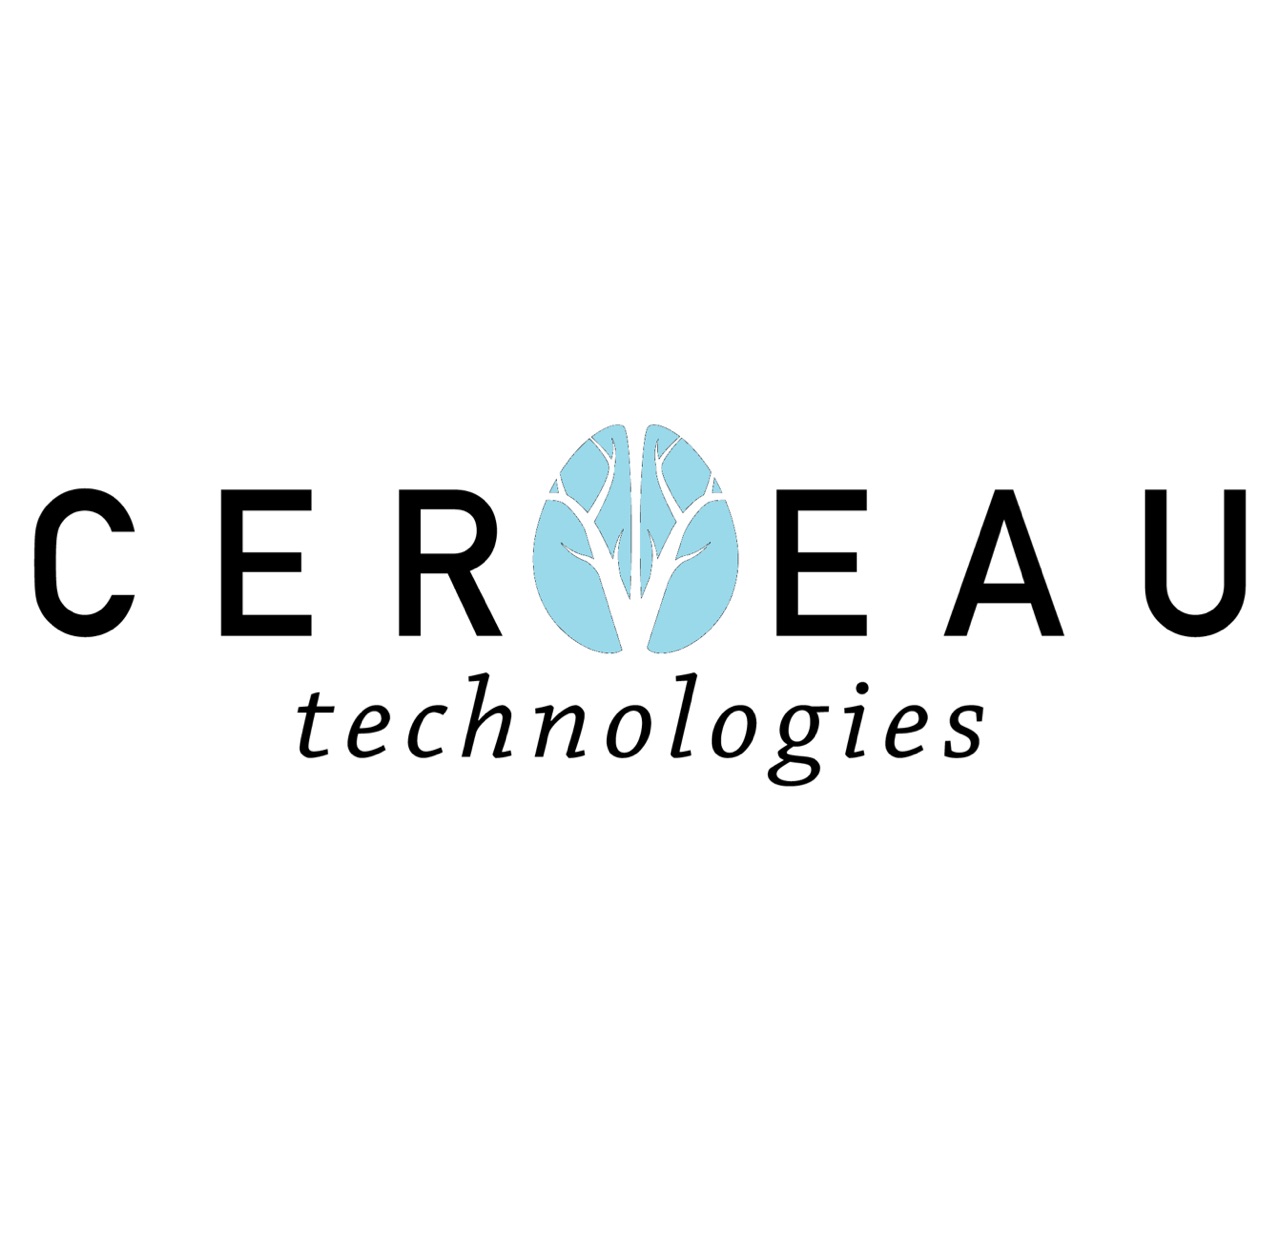 Cerveau Technologies Signs Agreement with H. Lundbeck A/S for Novel Tau Imaging Agent